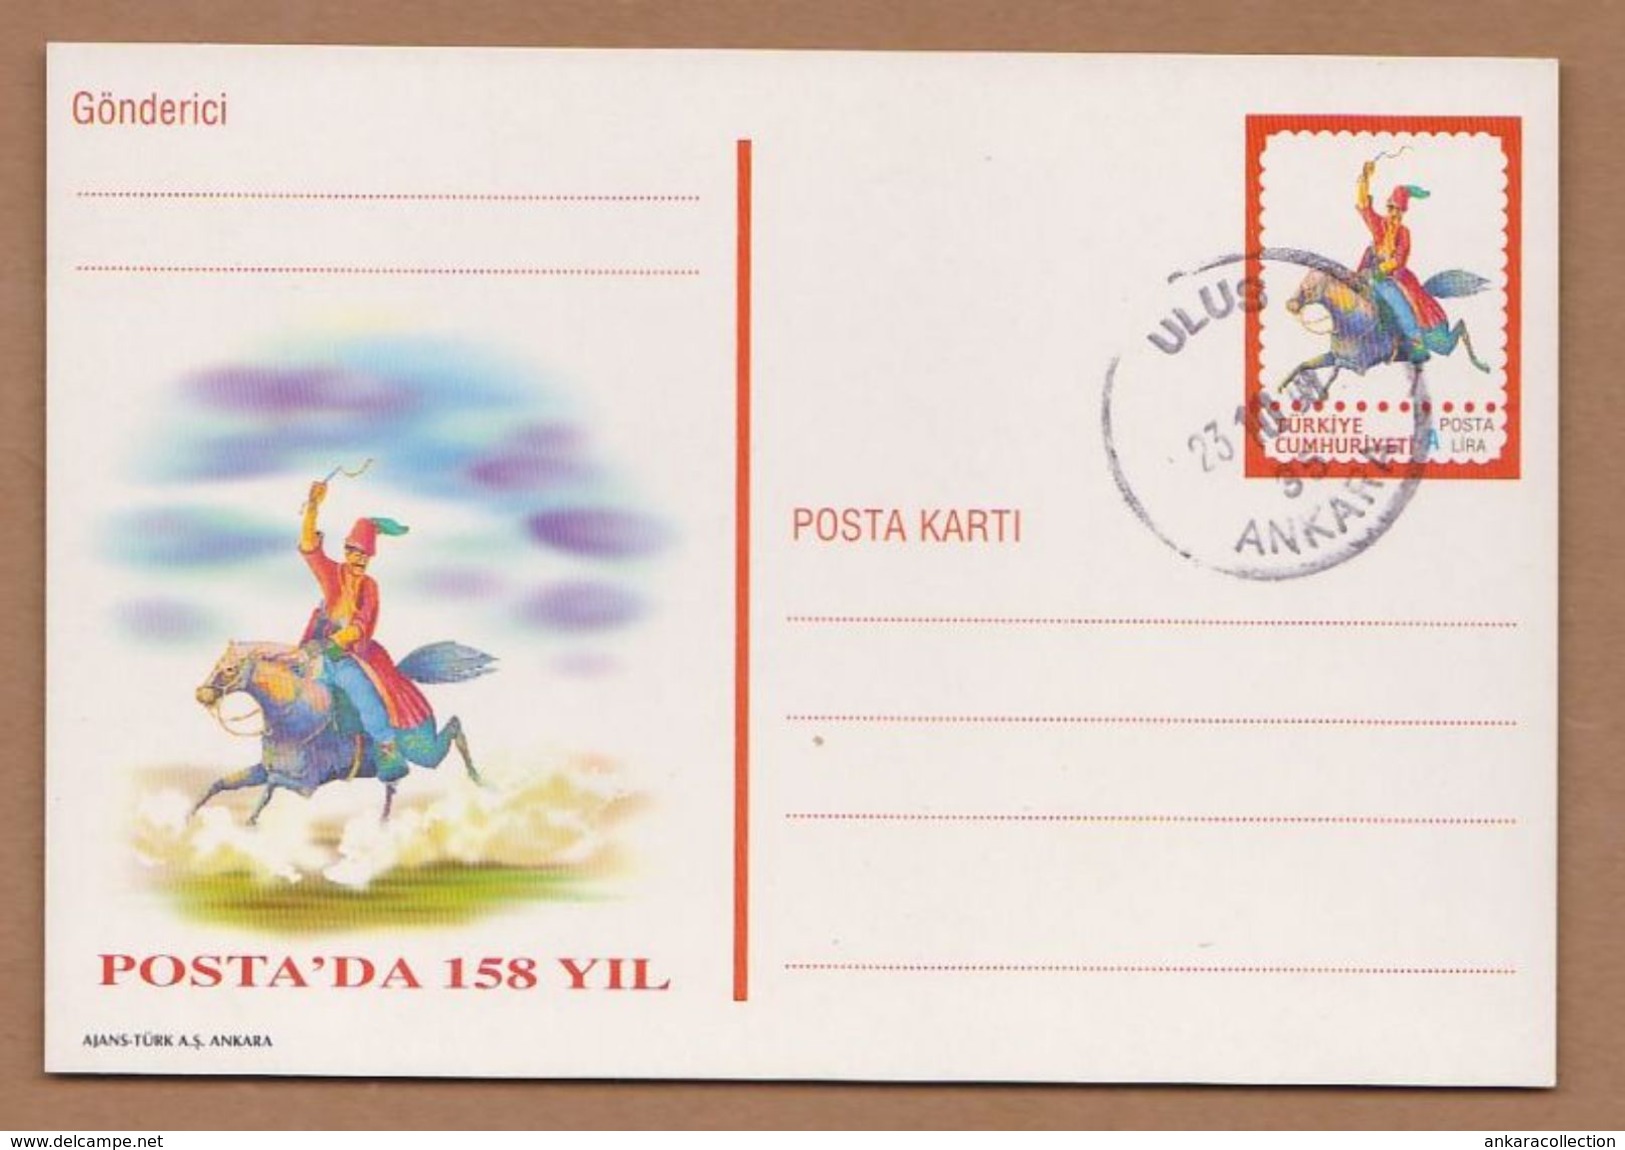 AC - TURKEY POSTAL STATIONERY - 158 YEARS IN THE POST ANKARA, 23 OCTOBER 1998 - Entiers Postaux